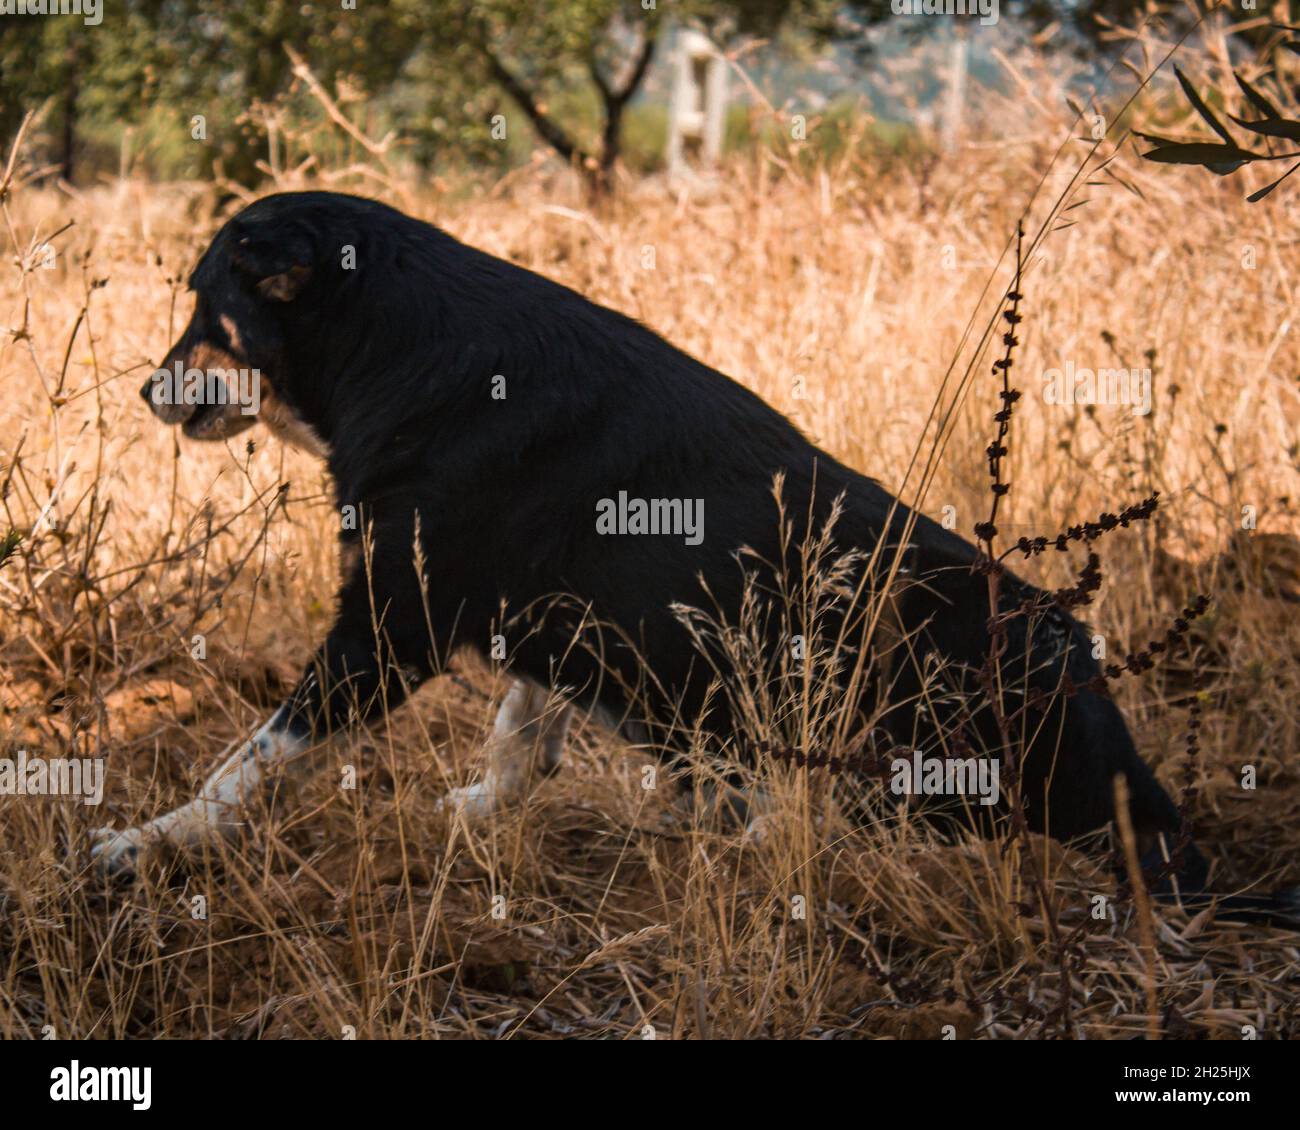 A Beautiful black guard dog sitting on the grass in a mountain village. Stock Photo